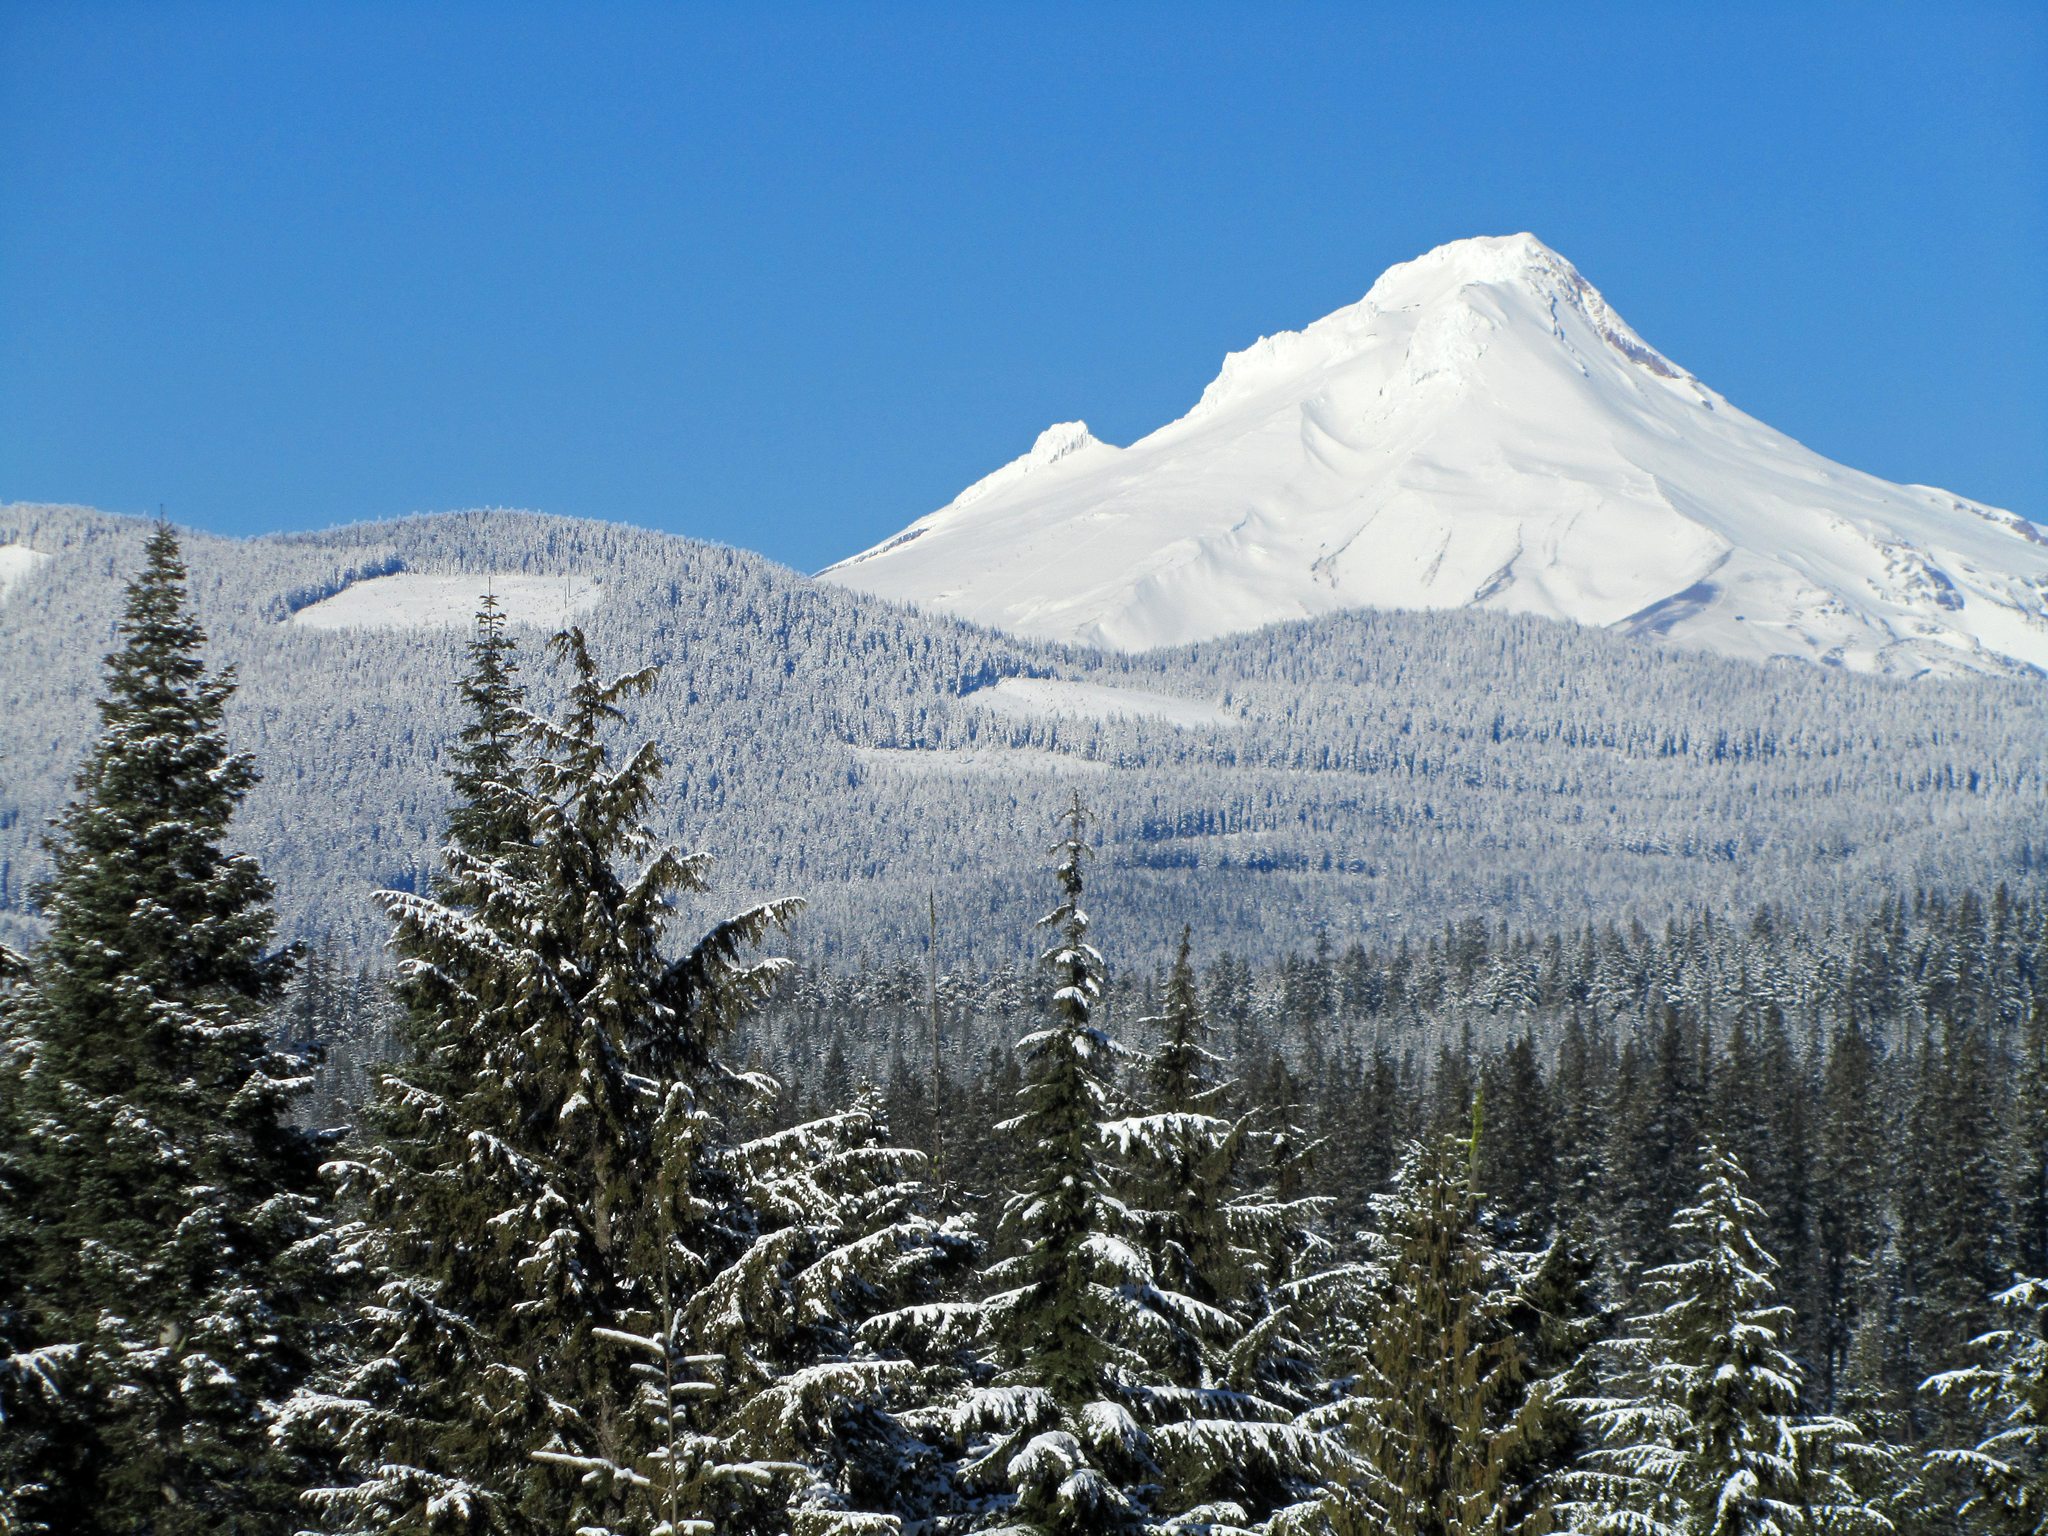 Color photograph showing a cloudless blue sky behind Mt. Hood completely blanketed with snow. Snow dusted conifers stretch before the mountain, looking grayer in the distance and deep green in the foreground